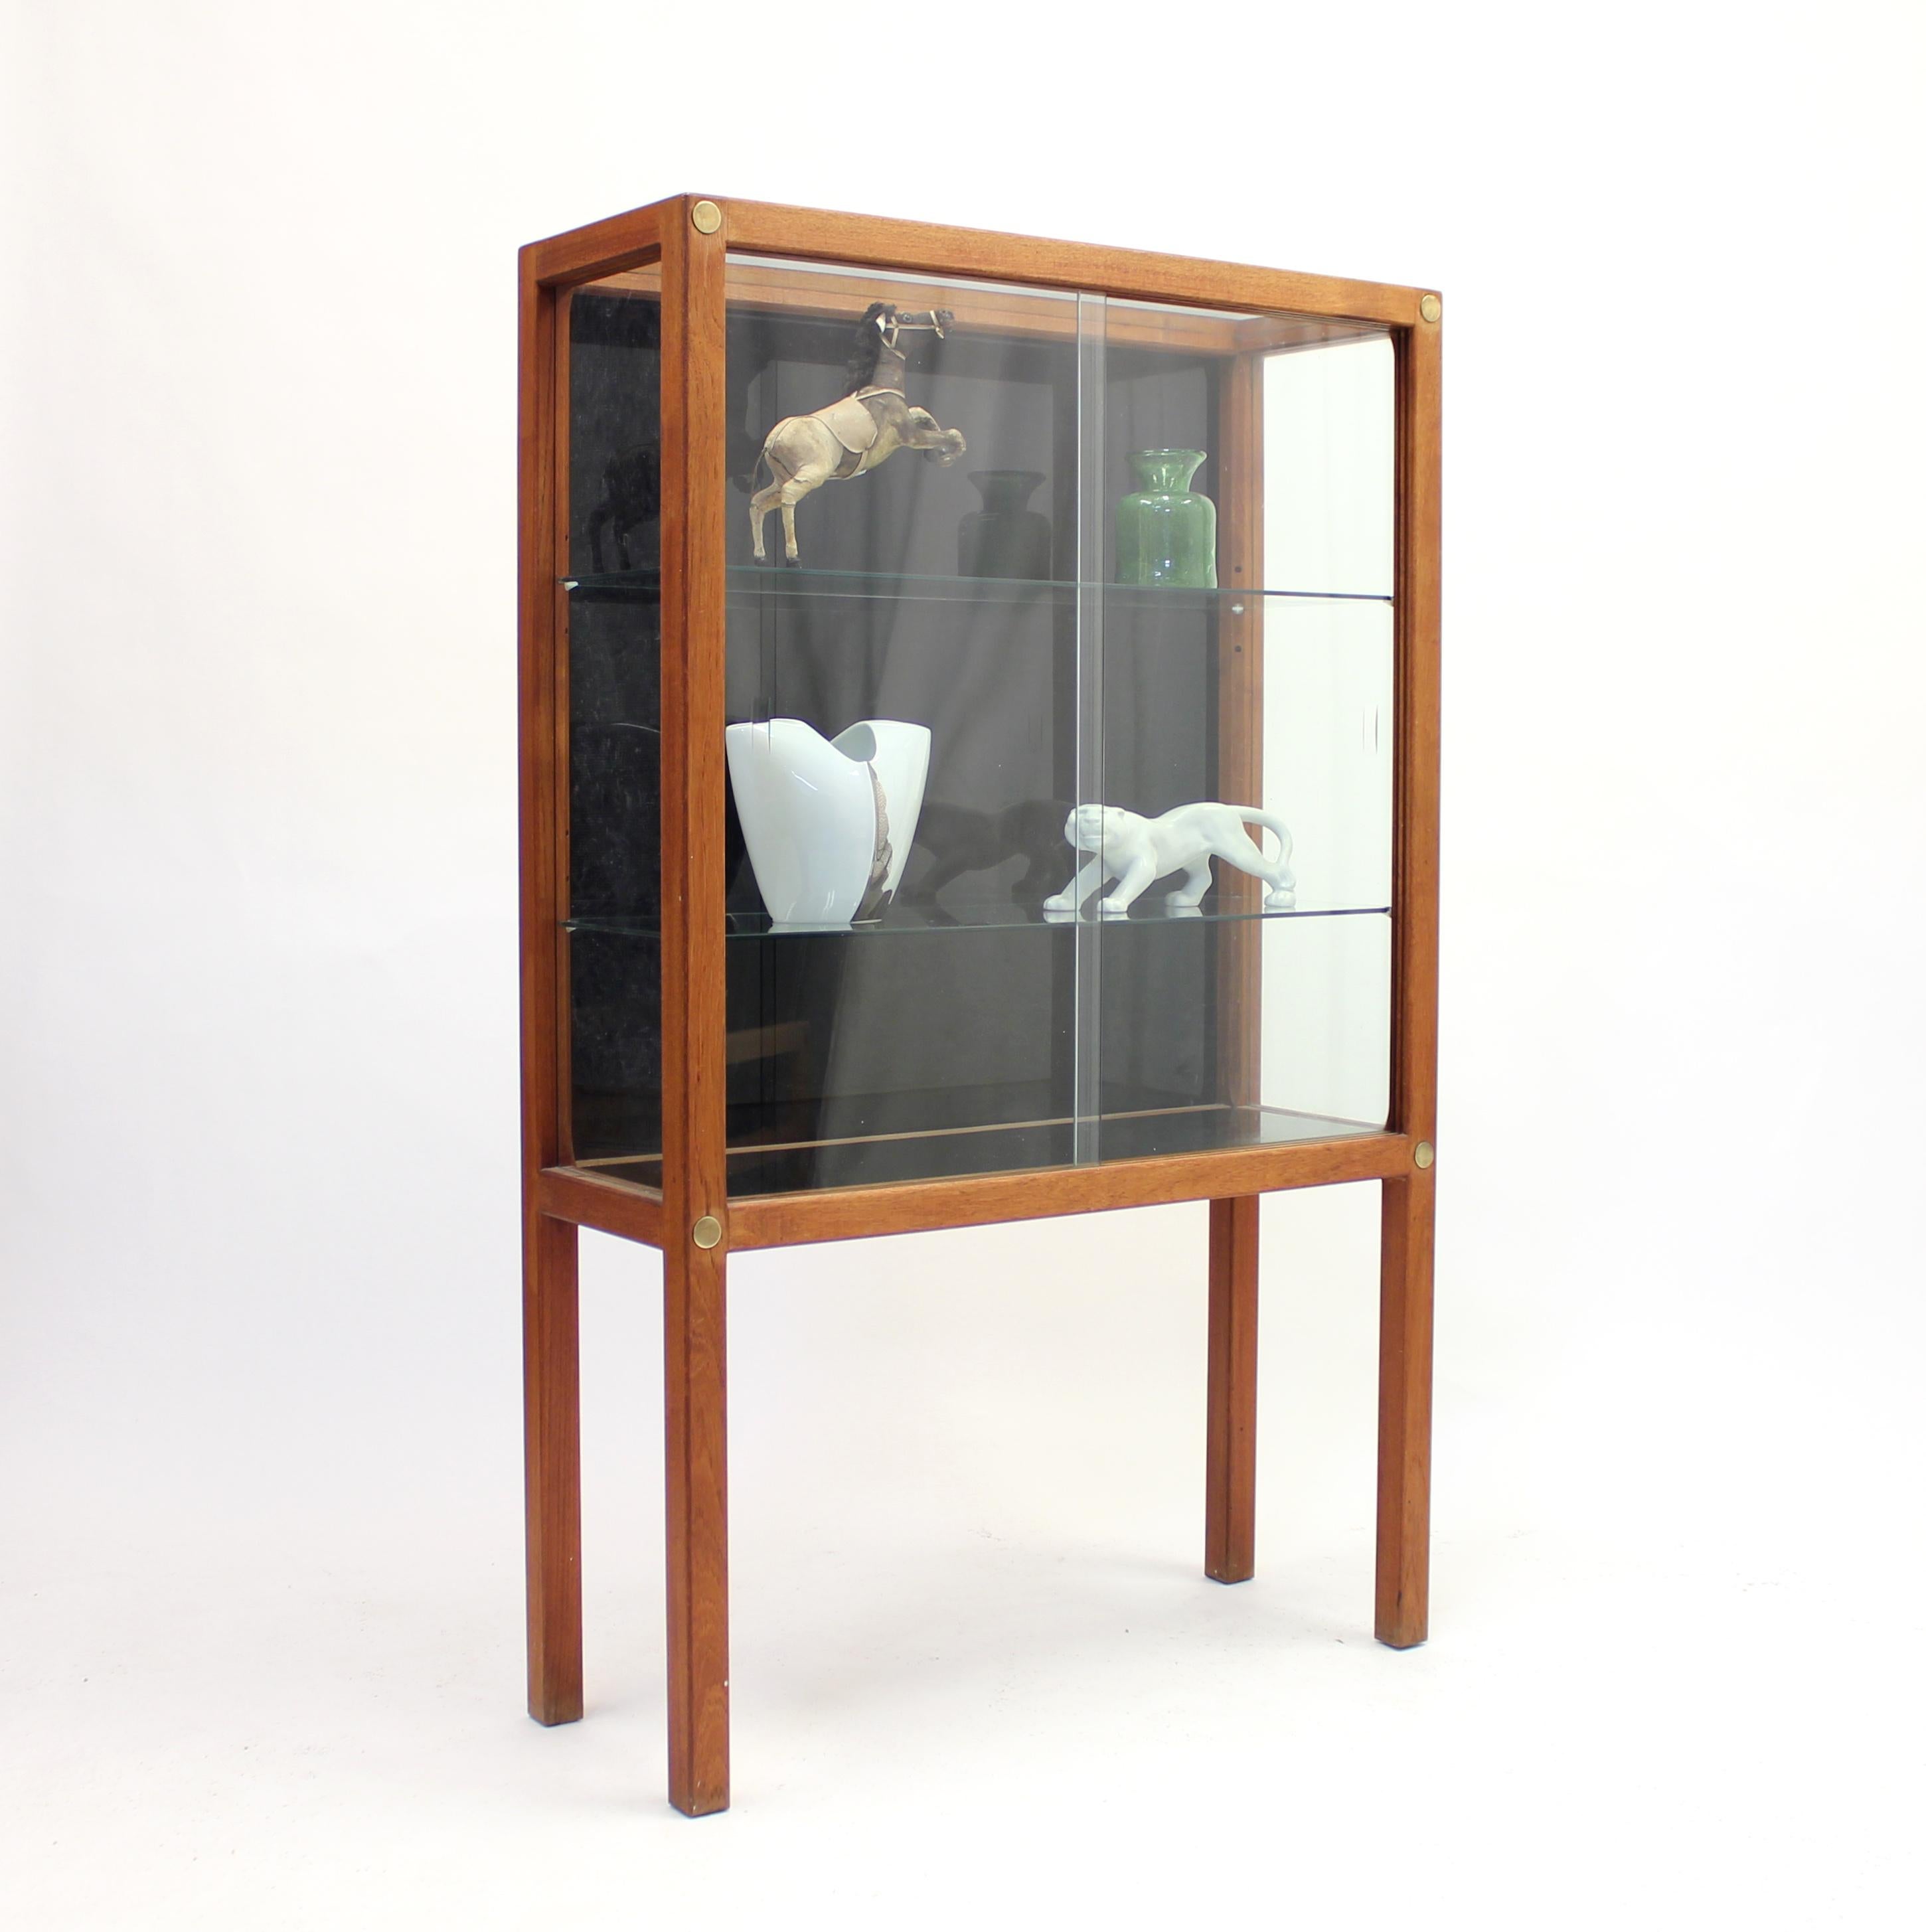 Rare vitrine display cabinet in teak with brass details designed by Carl Gustaf Hiort af Ornäs in the 1950s. Produced by his long time collaborator Huonekalu Mikko Nupponen Oy in the town of Lahti, Finland. This cabinet was produced in a few